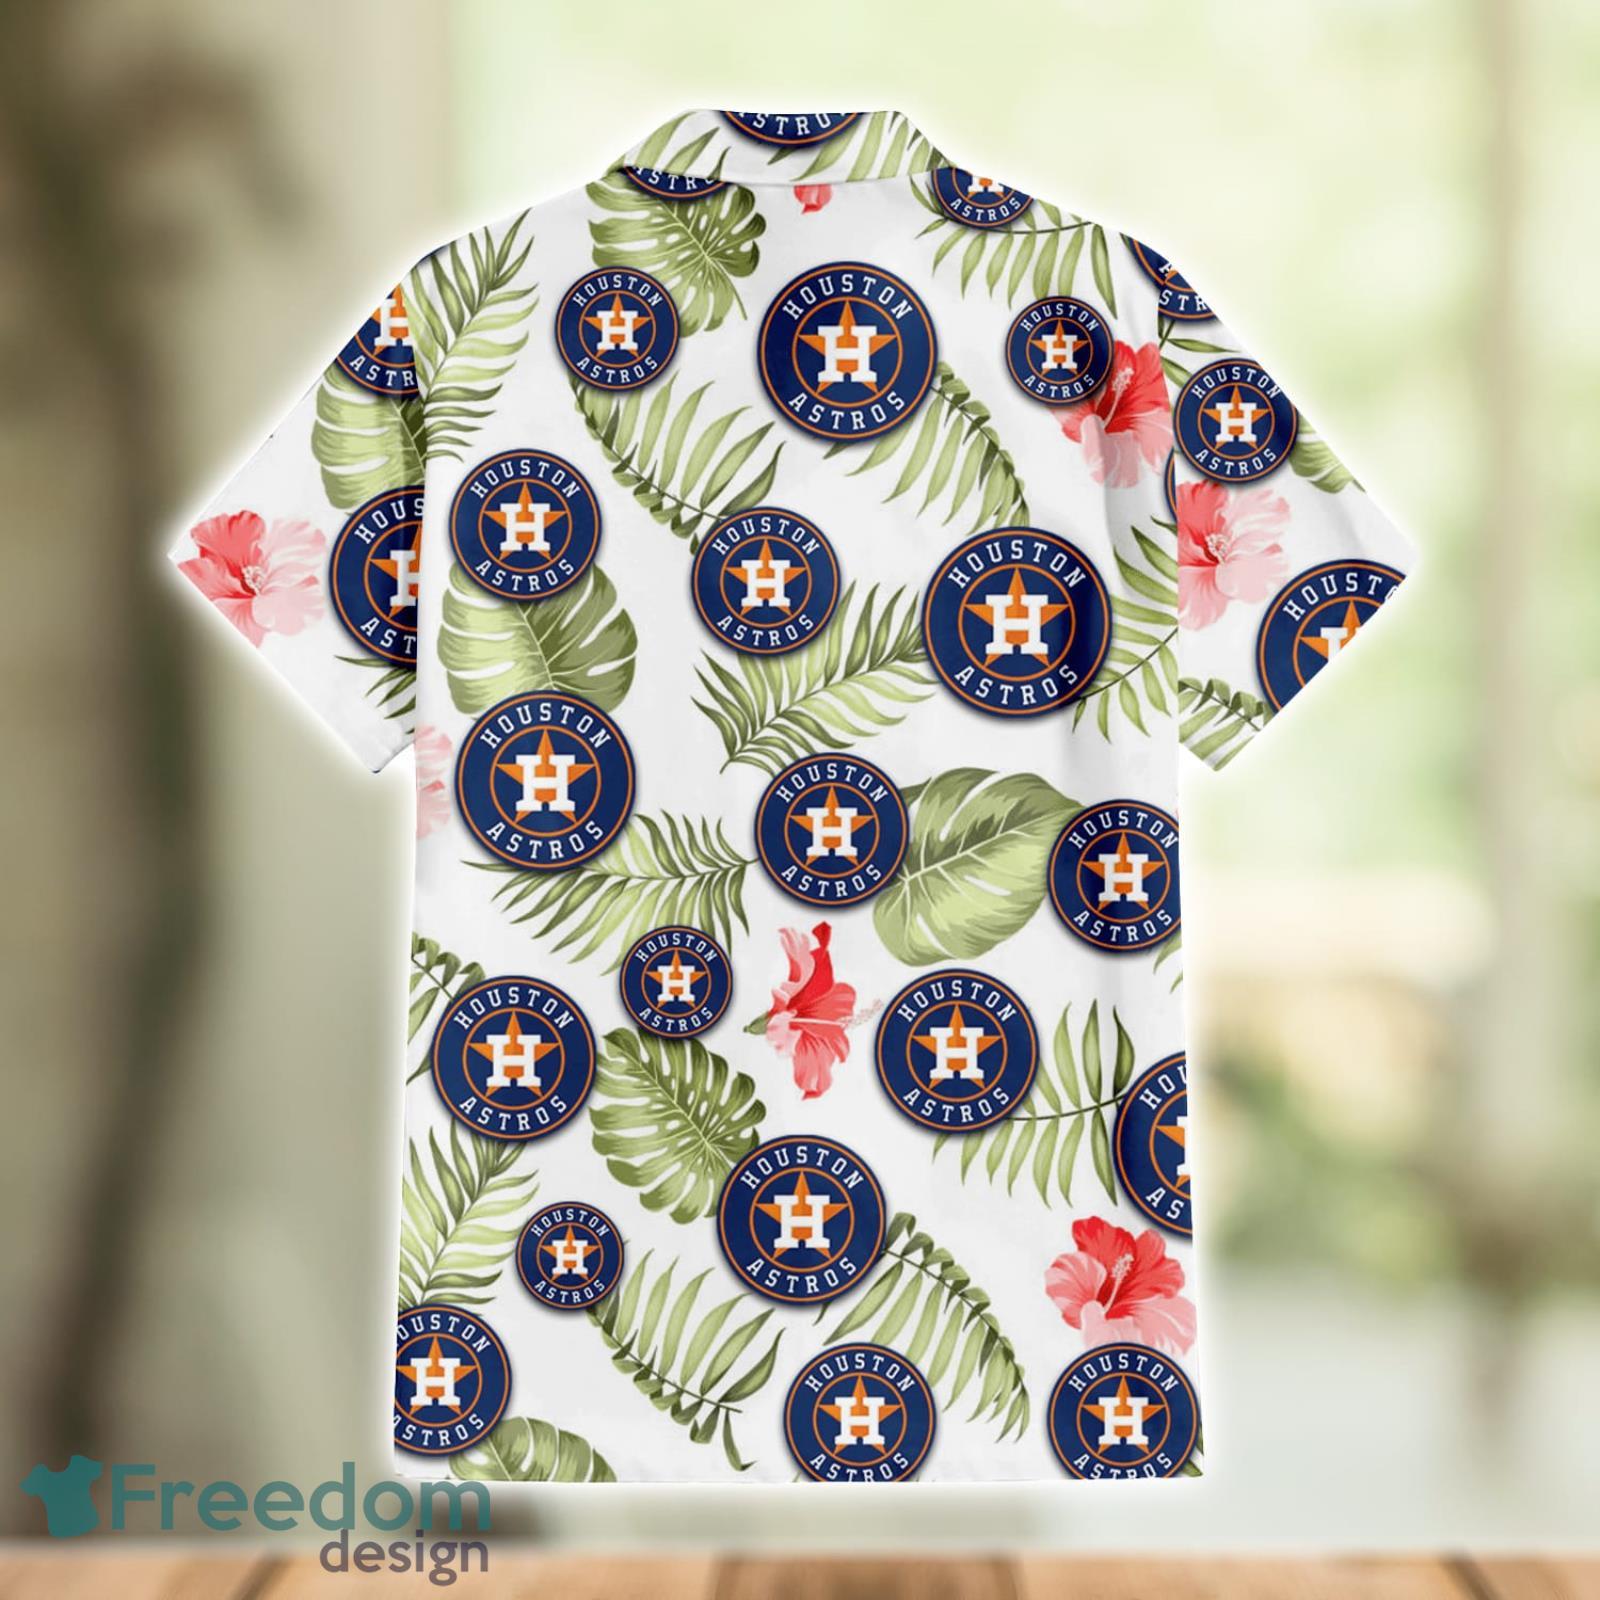 Houston Astros MLB Jersey Shirt Custom Number And Name For Men And Women  Gift Fans - Freedomdesign